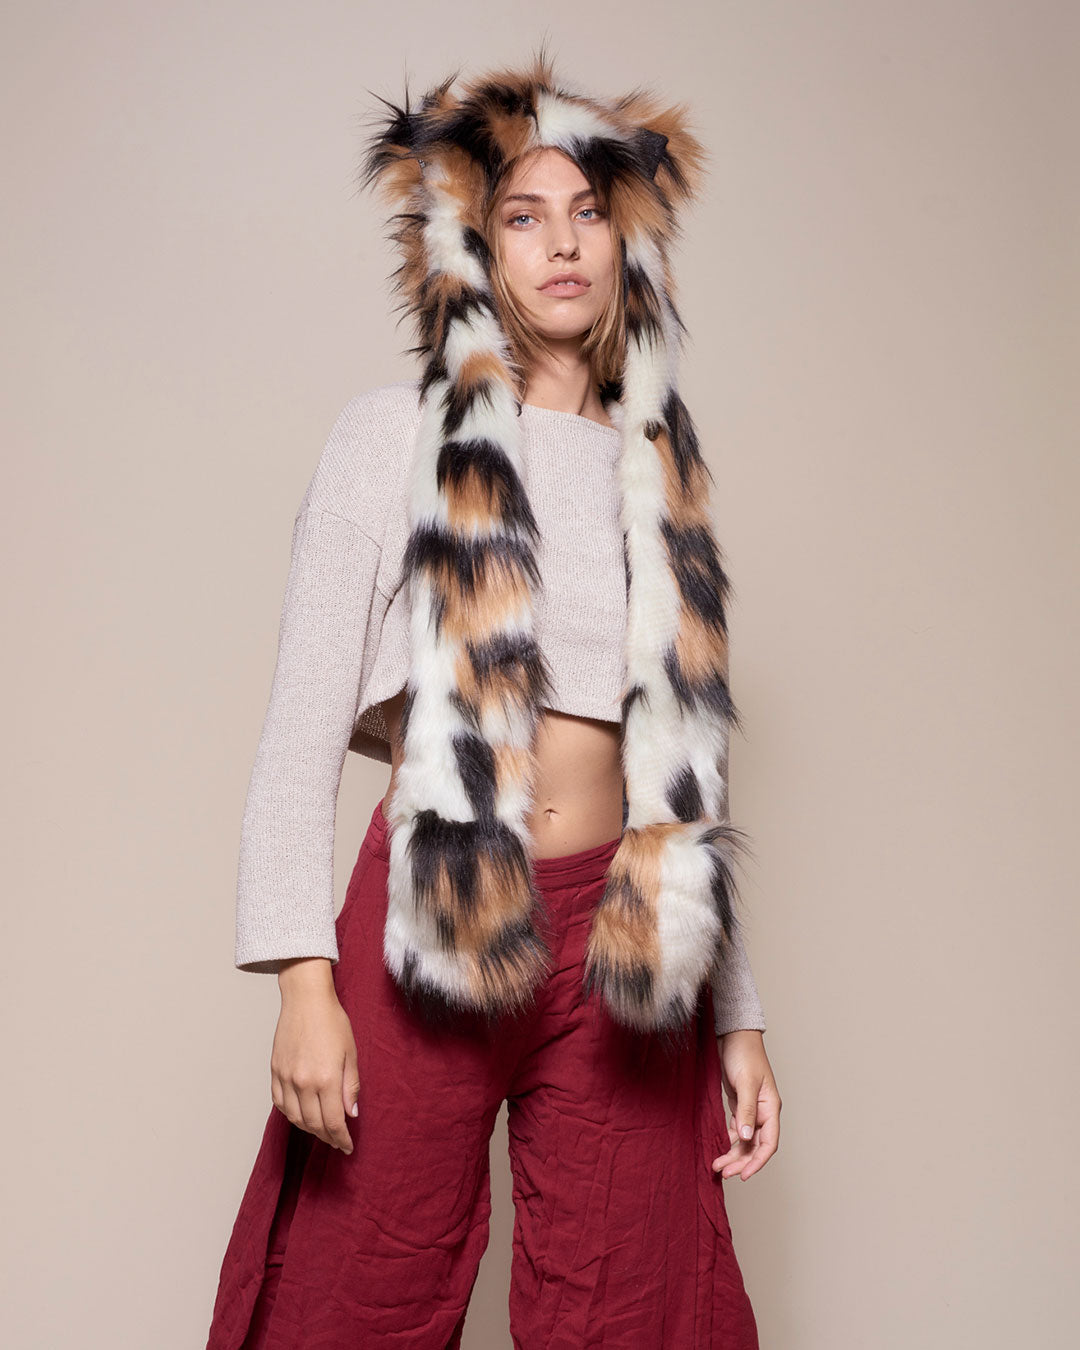 SpiritHood Featuring Manx Cat Faux Fur on Woman